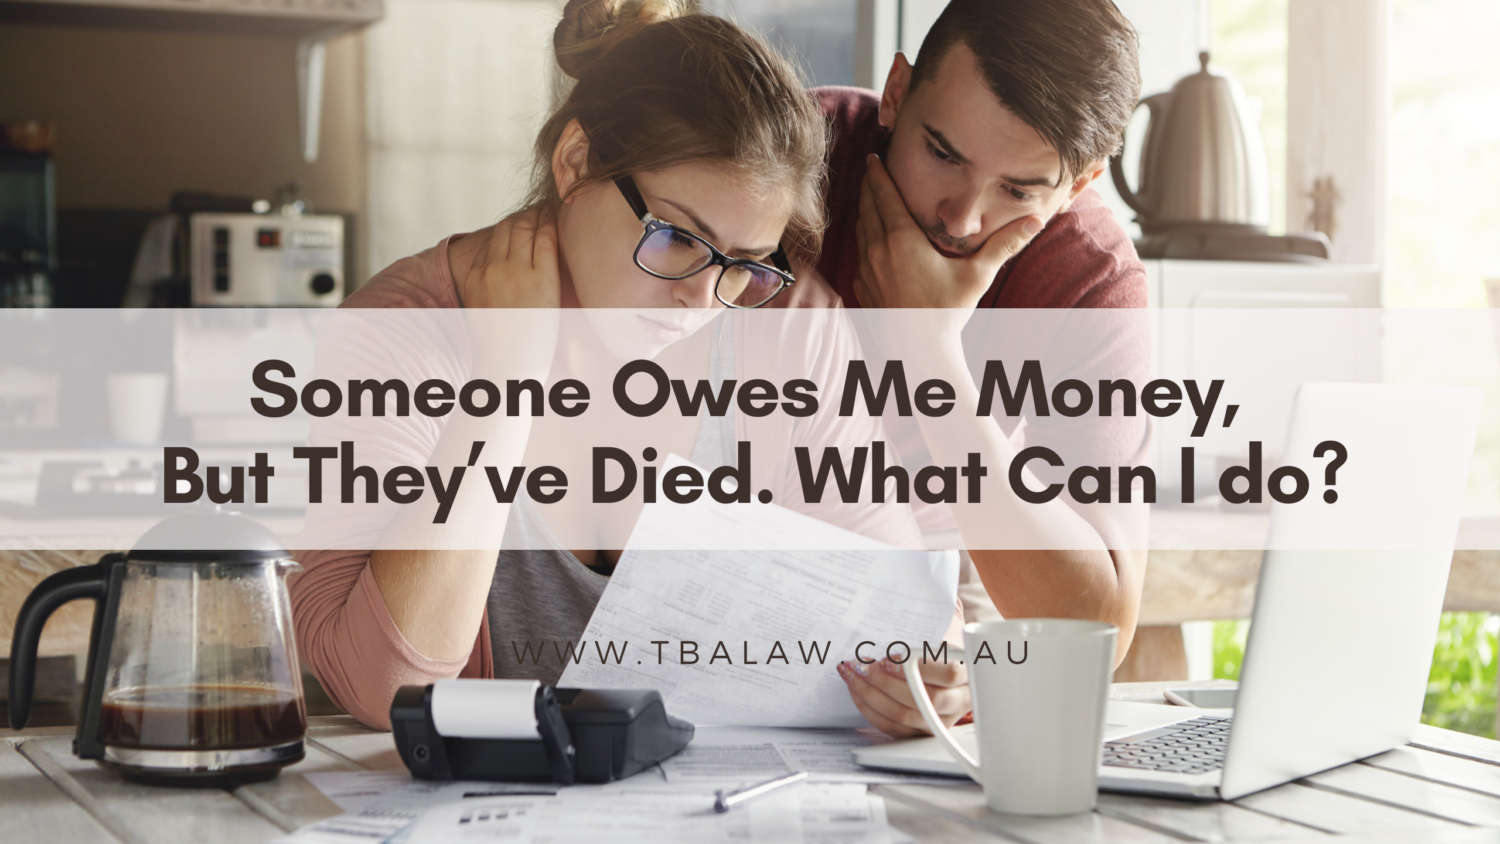 Someone you know owes you money, but they have passed away.